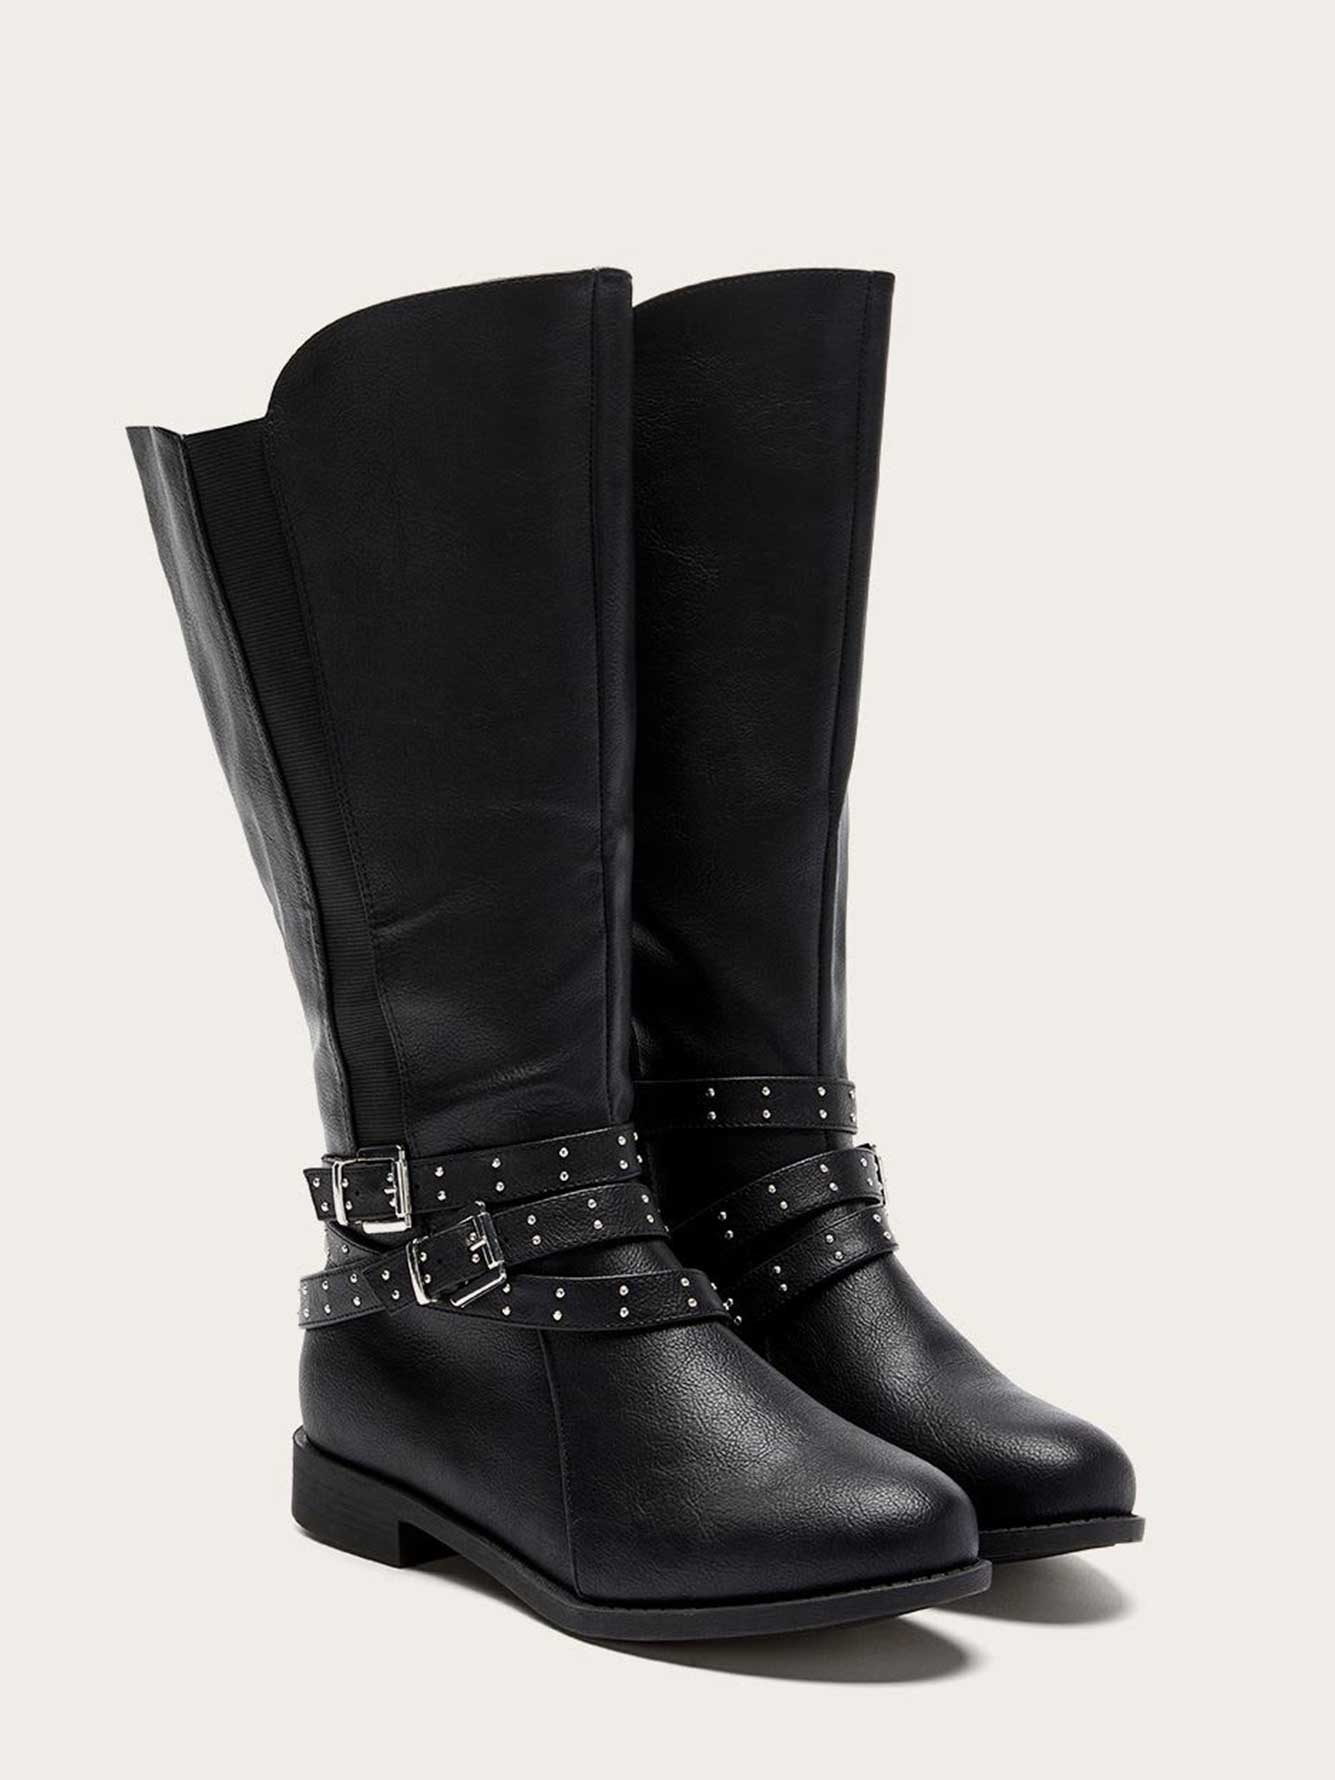 Extra Wide Calf Tall Boots with Buckles and Studs | Penningtons